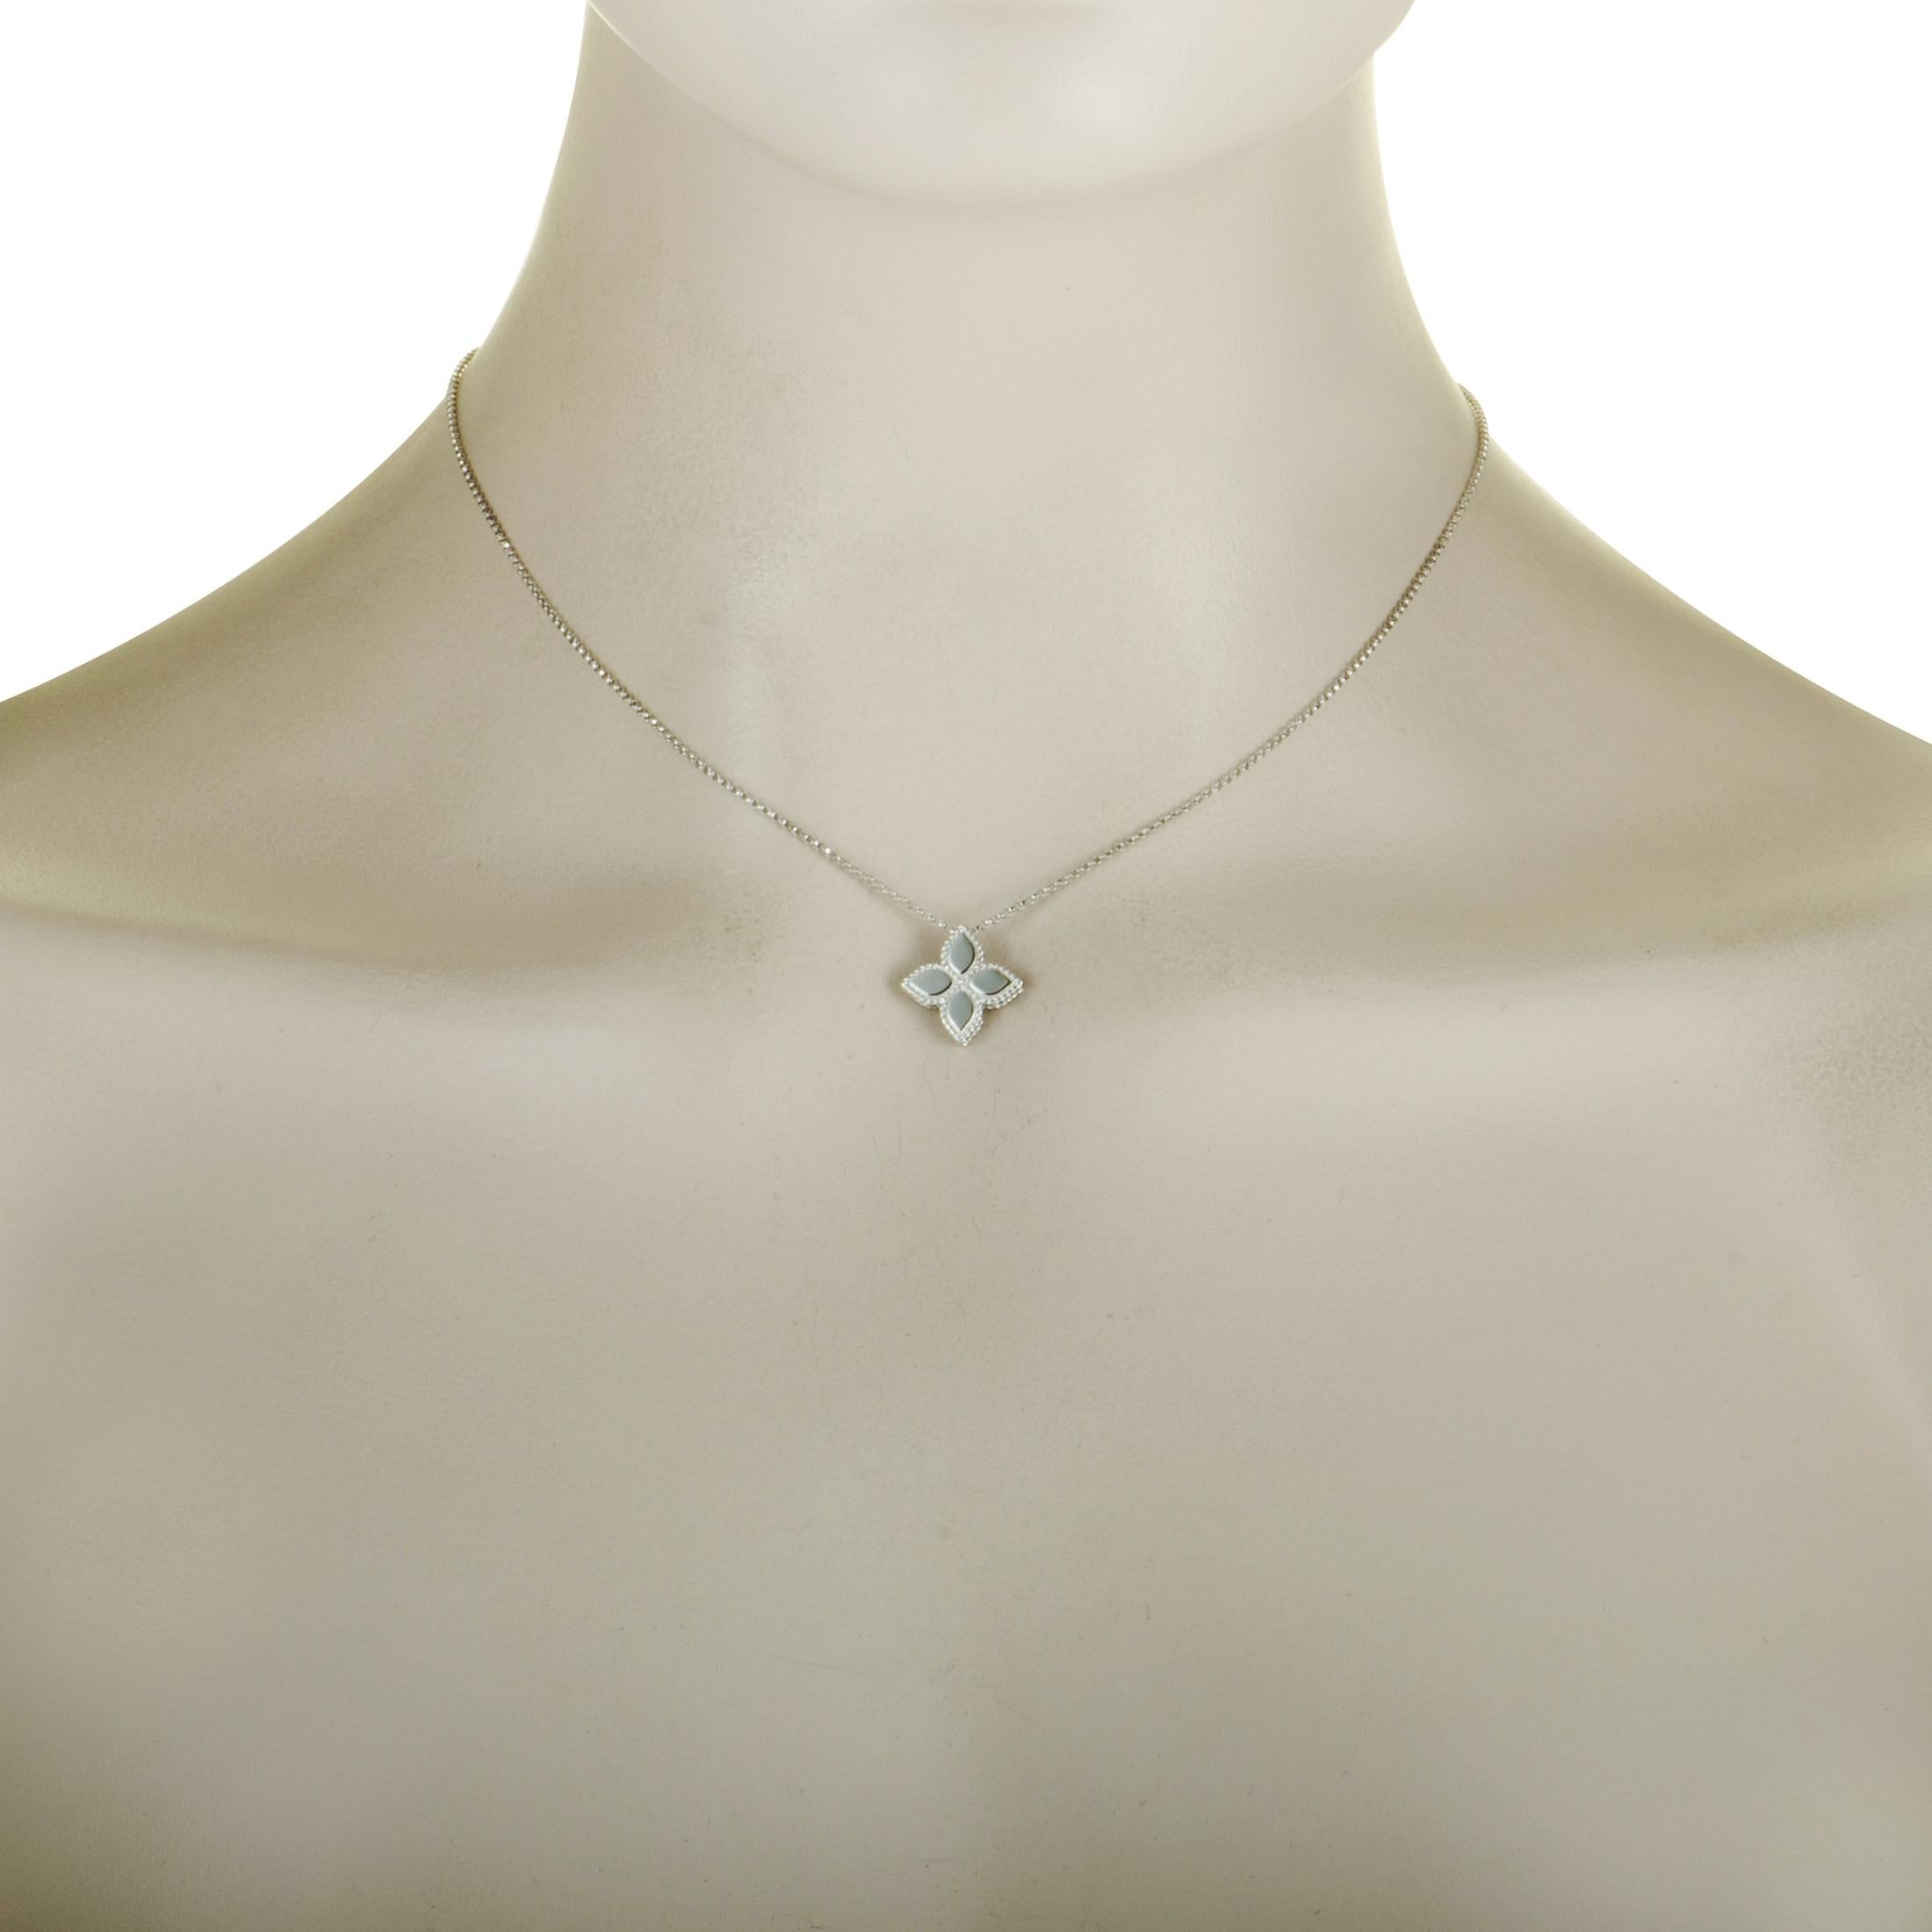 The “Princess Flower” necklace by Roberto Coin is crafted from 18K white gold and weighs 3.7 grams. The necklace is presented with a 16” chain onto which a 0.50” by 0.50” pendant is attached.
 
 This item is offered in brand new condition and